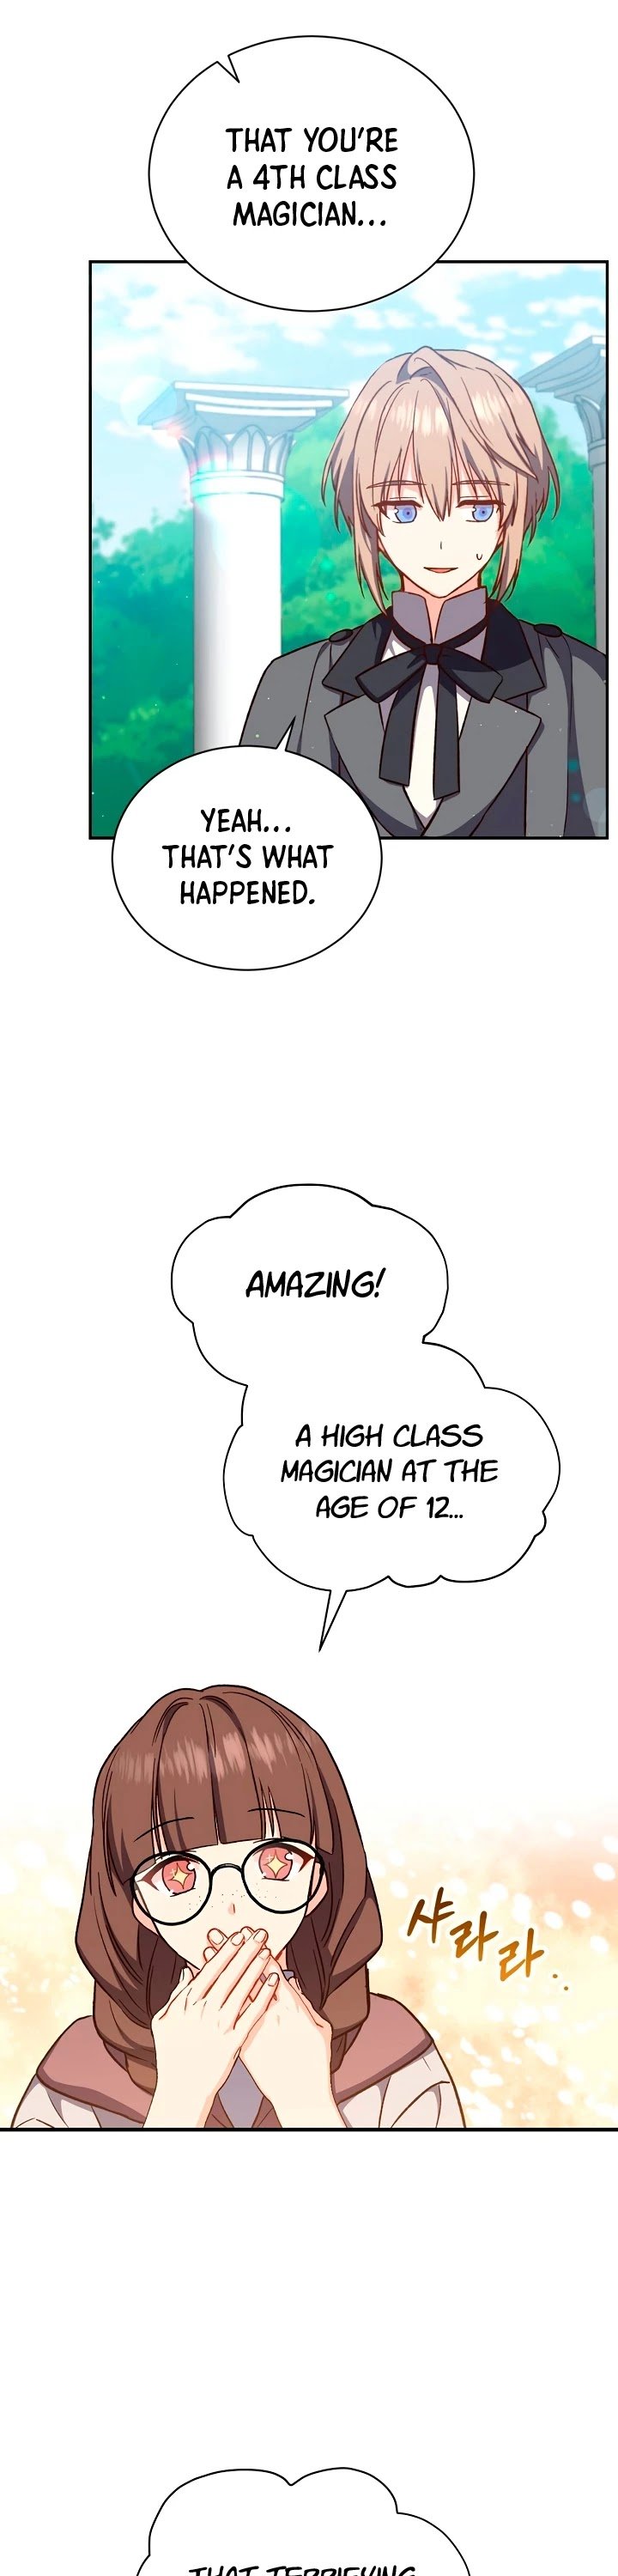 Return of the 8th class Magician chapter 19